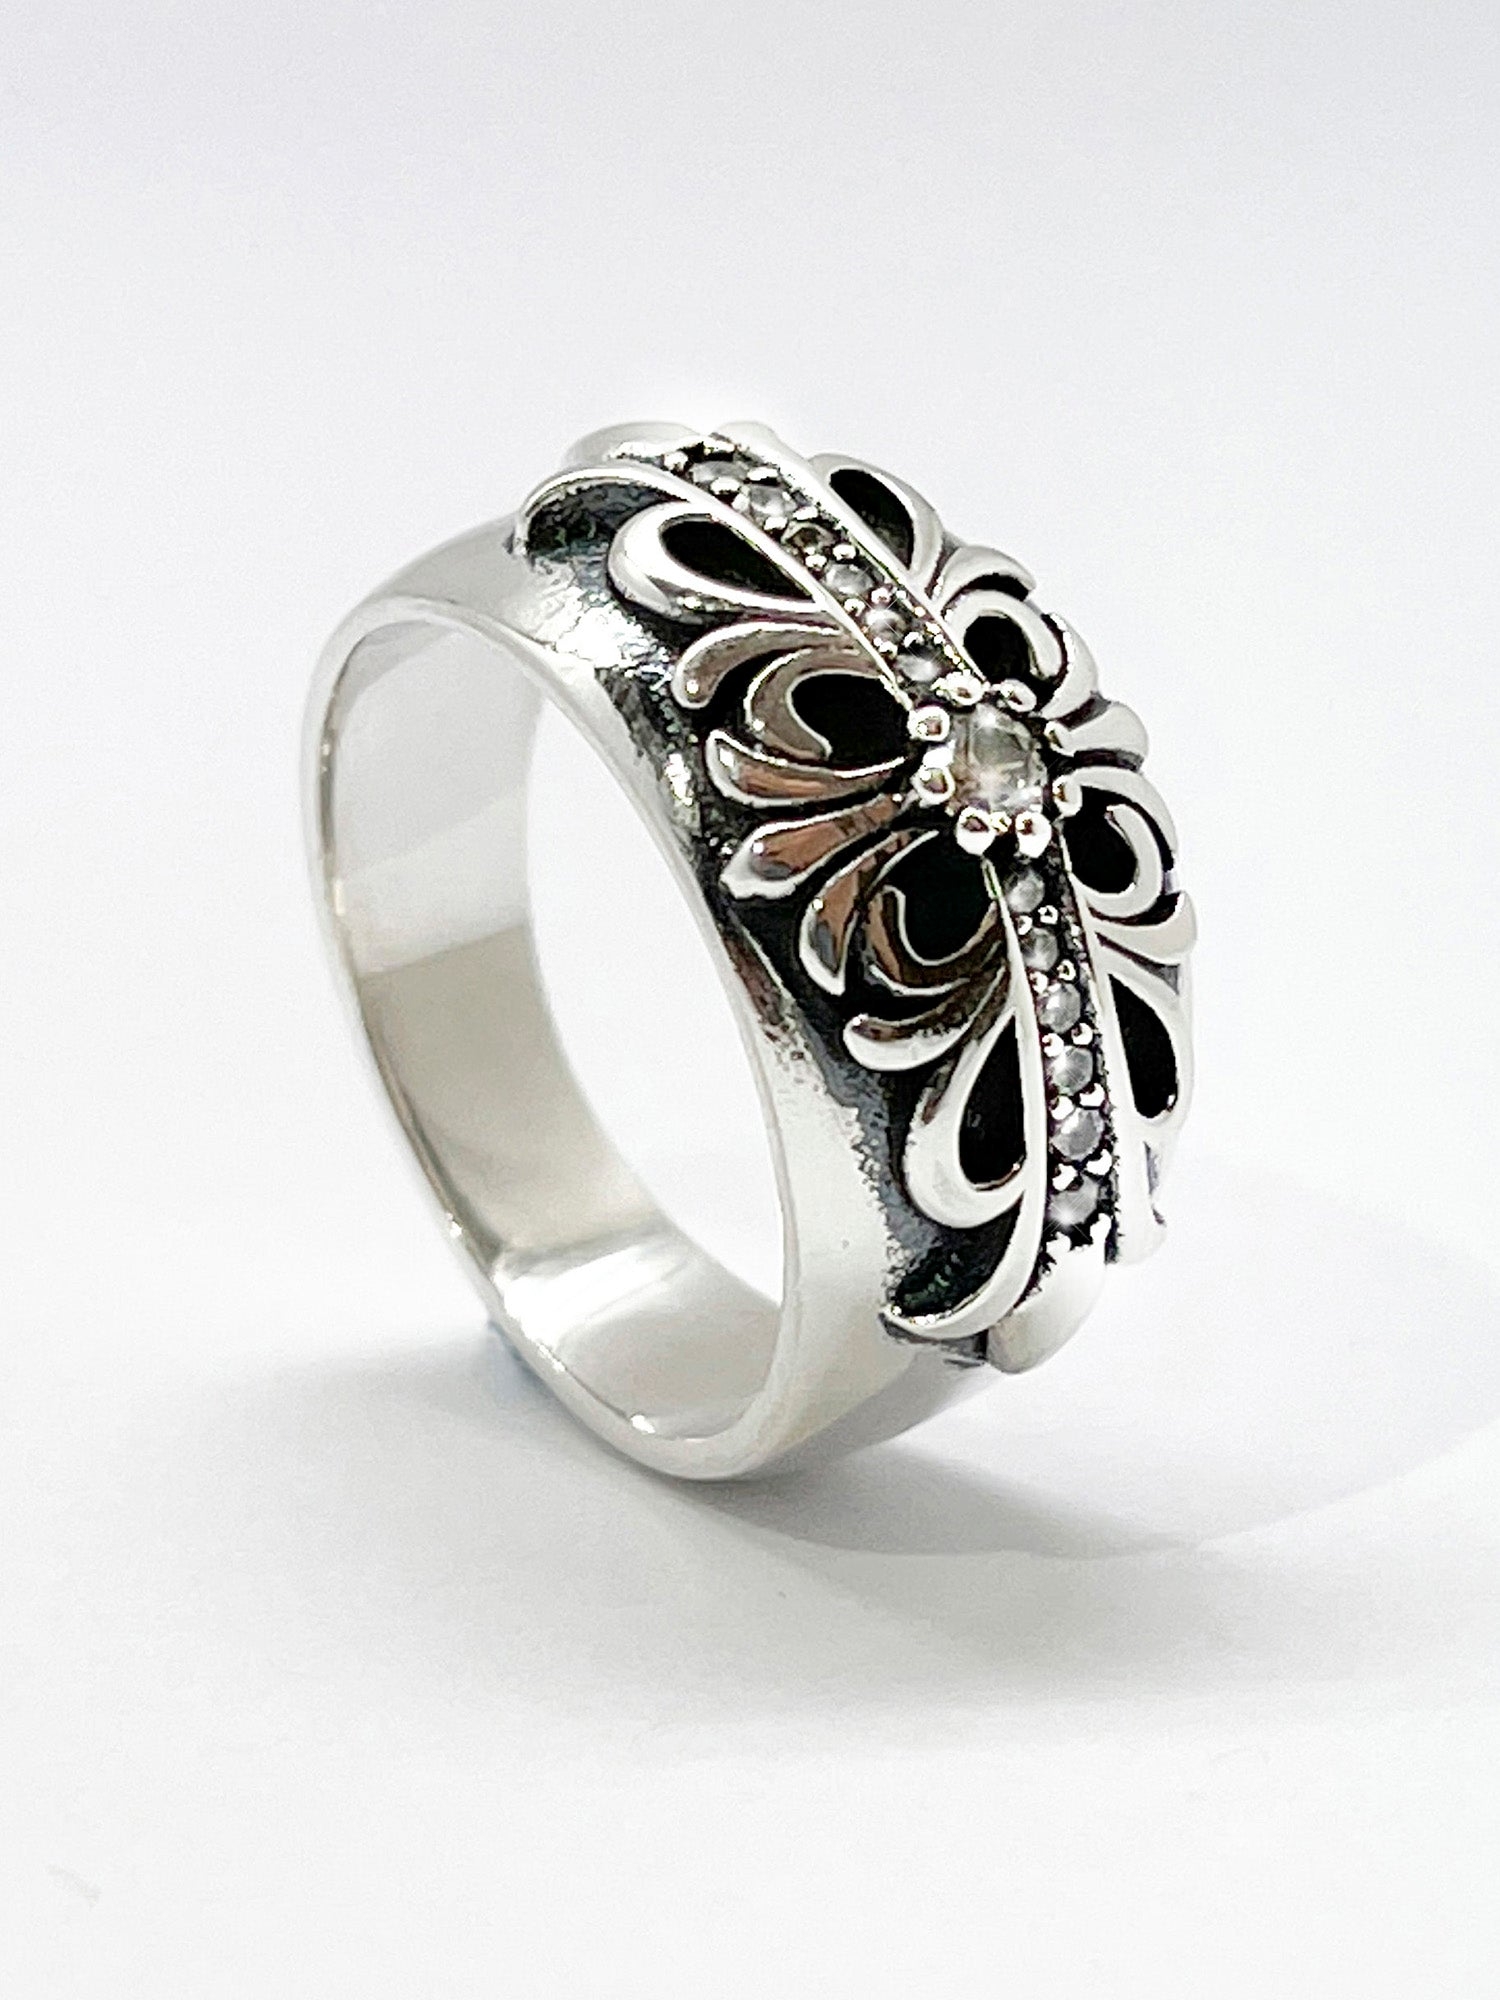 Bspoiled Women’s Silver Pattern Ring 925 – 8 – BSpoiled